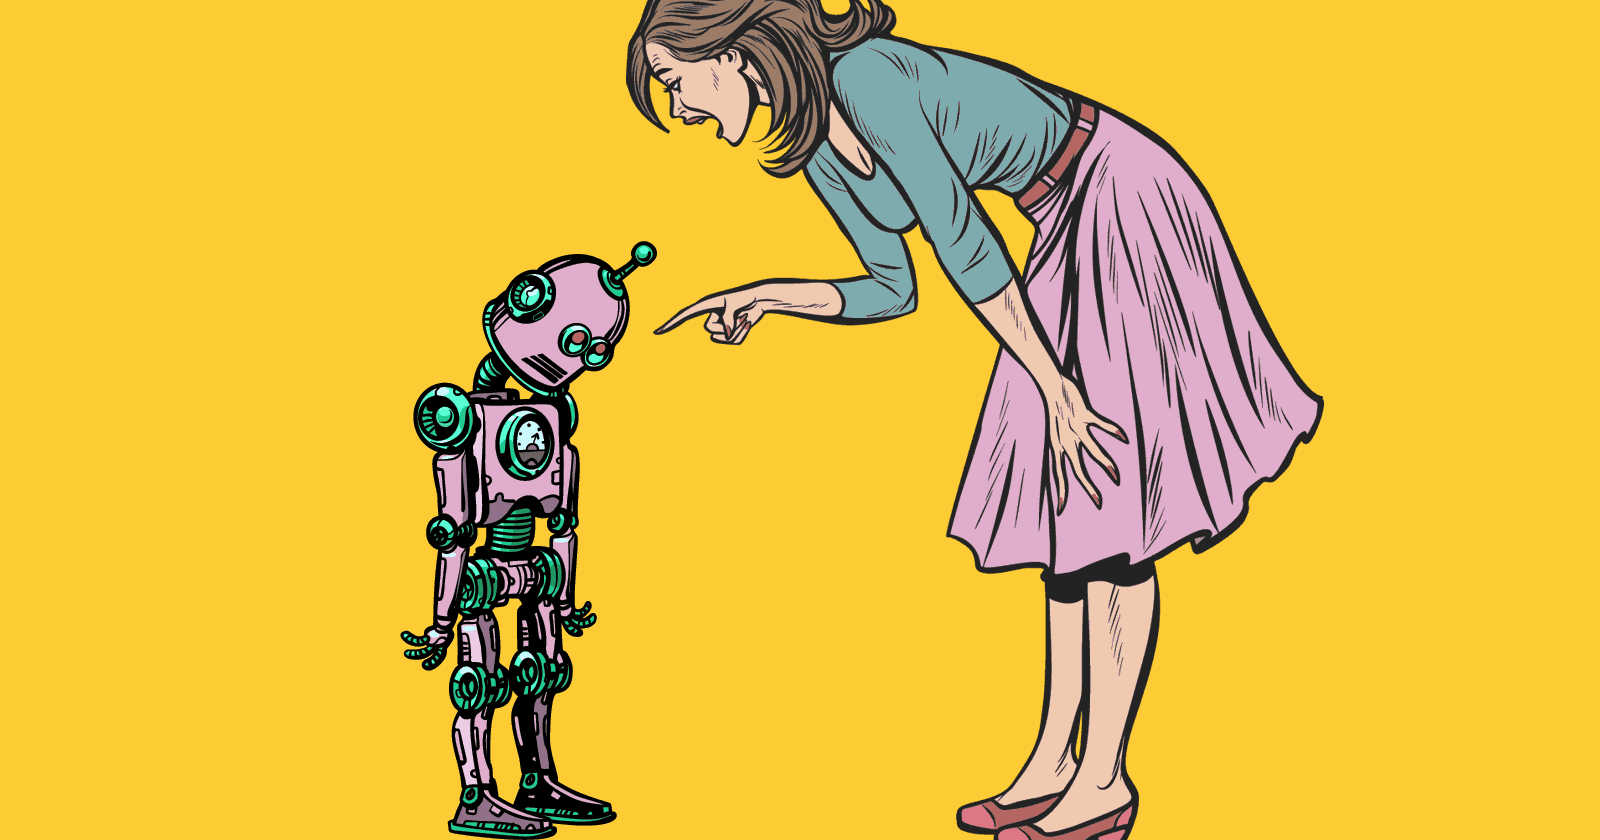 Image of a mother figure scolding a child sized robot